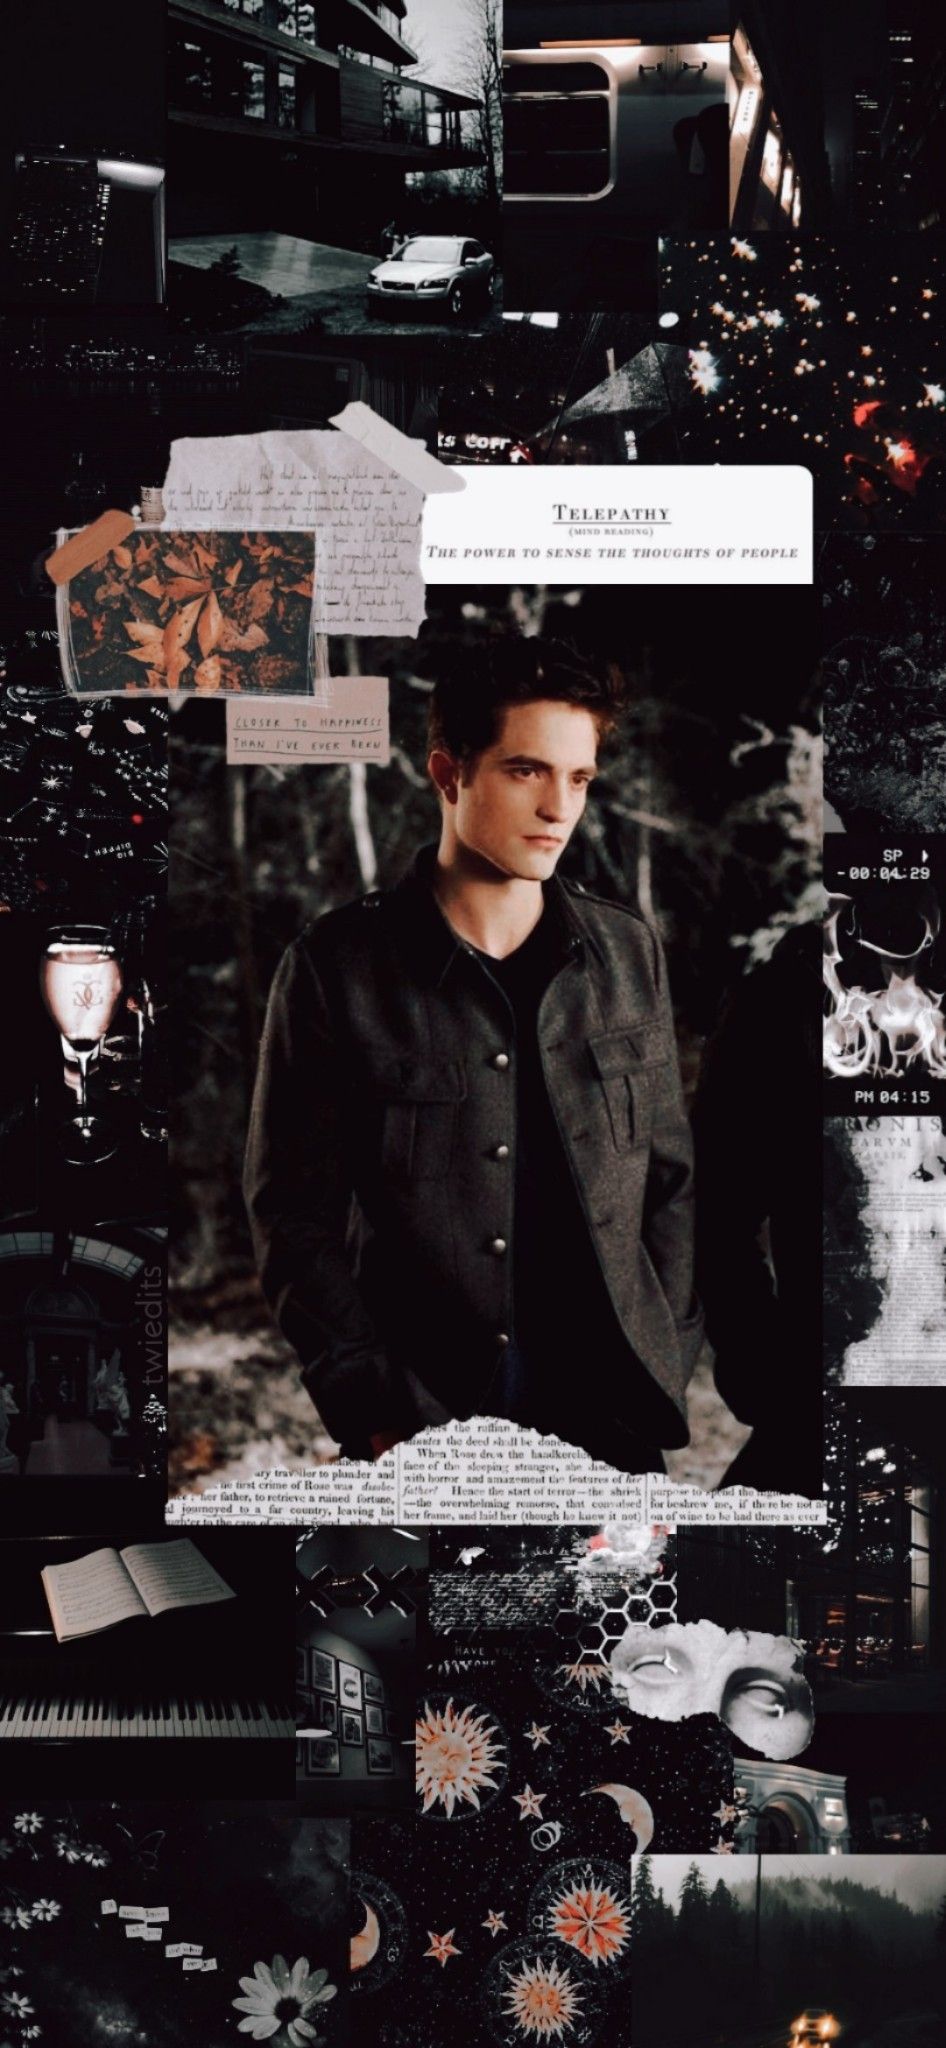 Edward Cullen aesthetic wallpaper I made for my phone - Twilight